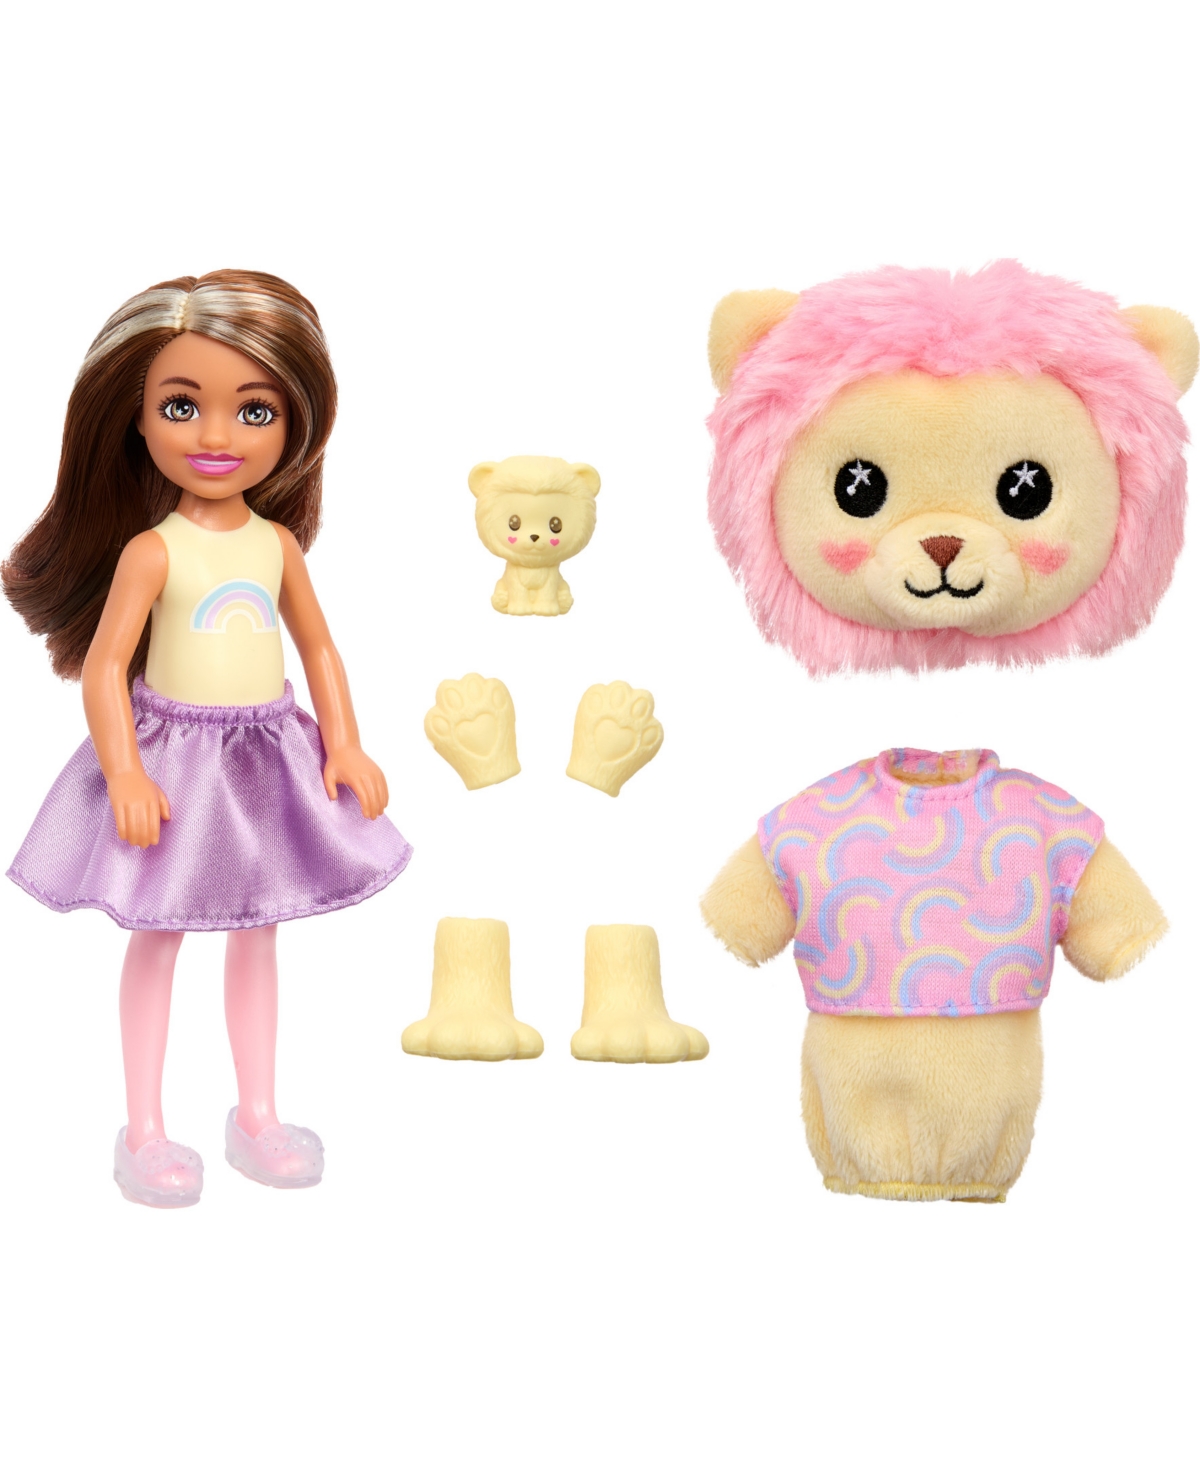 Barbie Kids' Cutie Reveal Cozy Cute T-shirts Series Chelsea Doll And Accessories In Multi-color